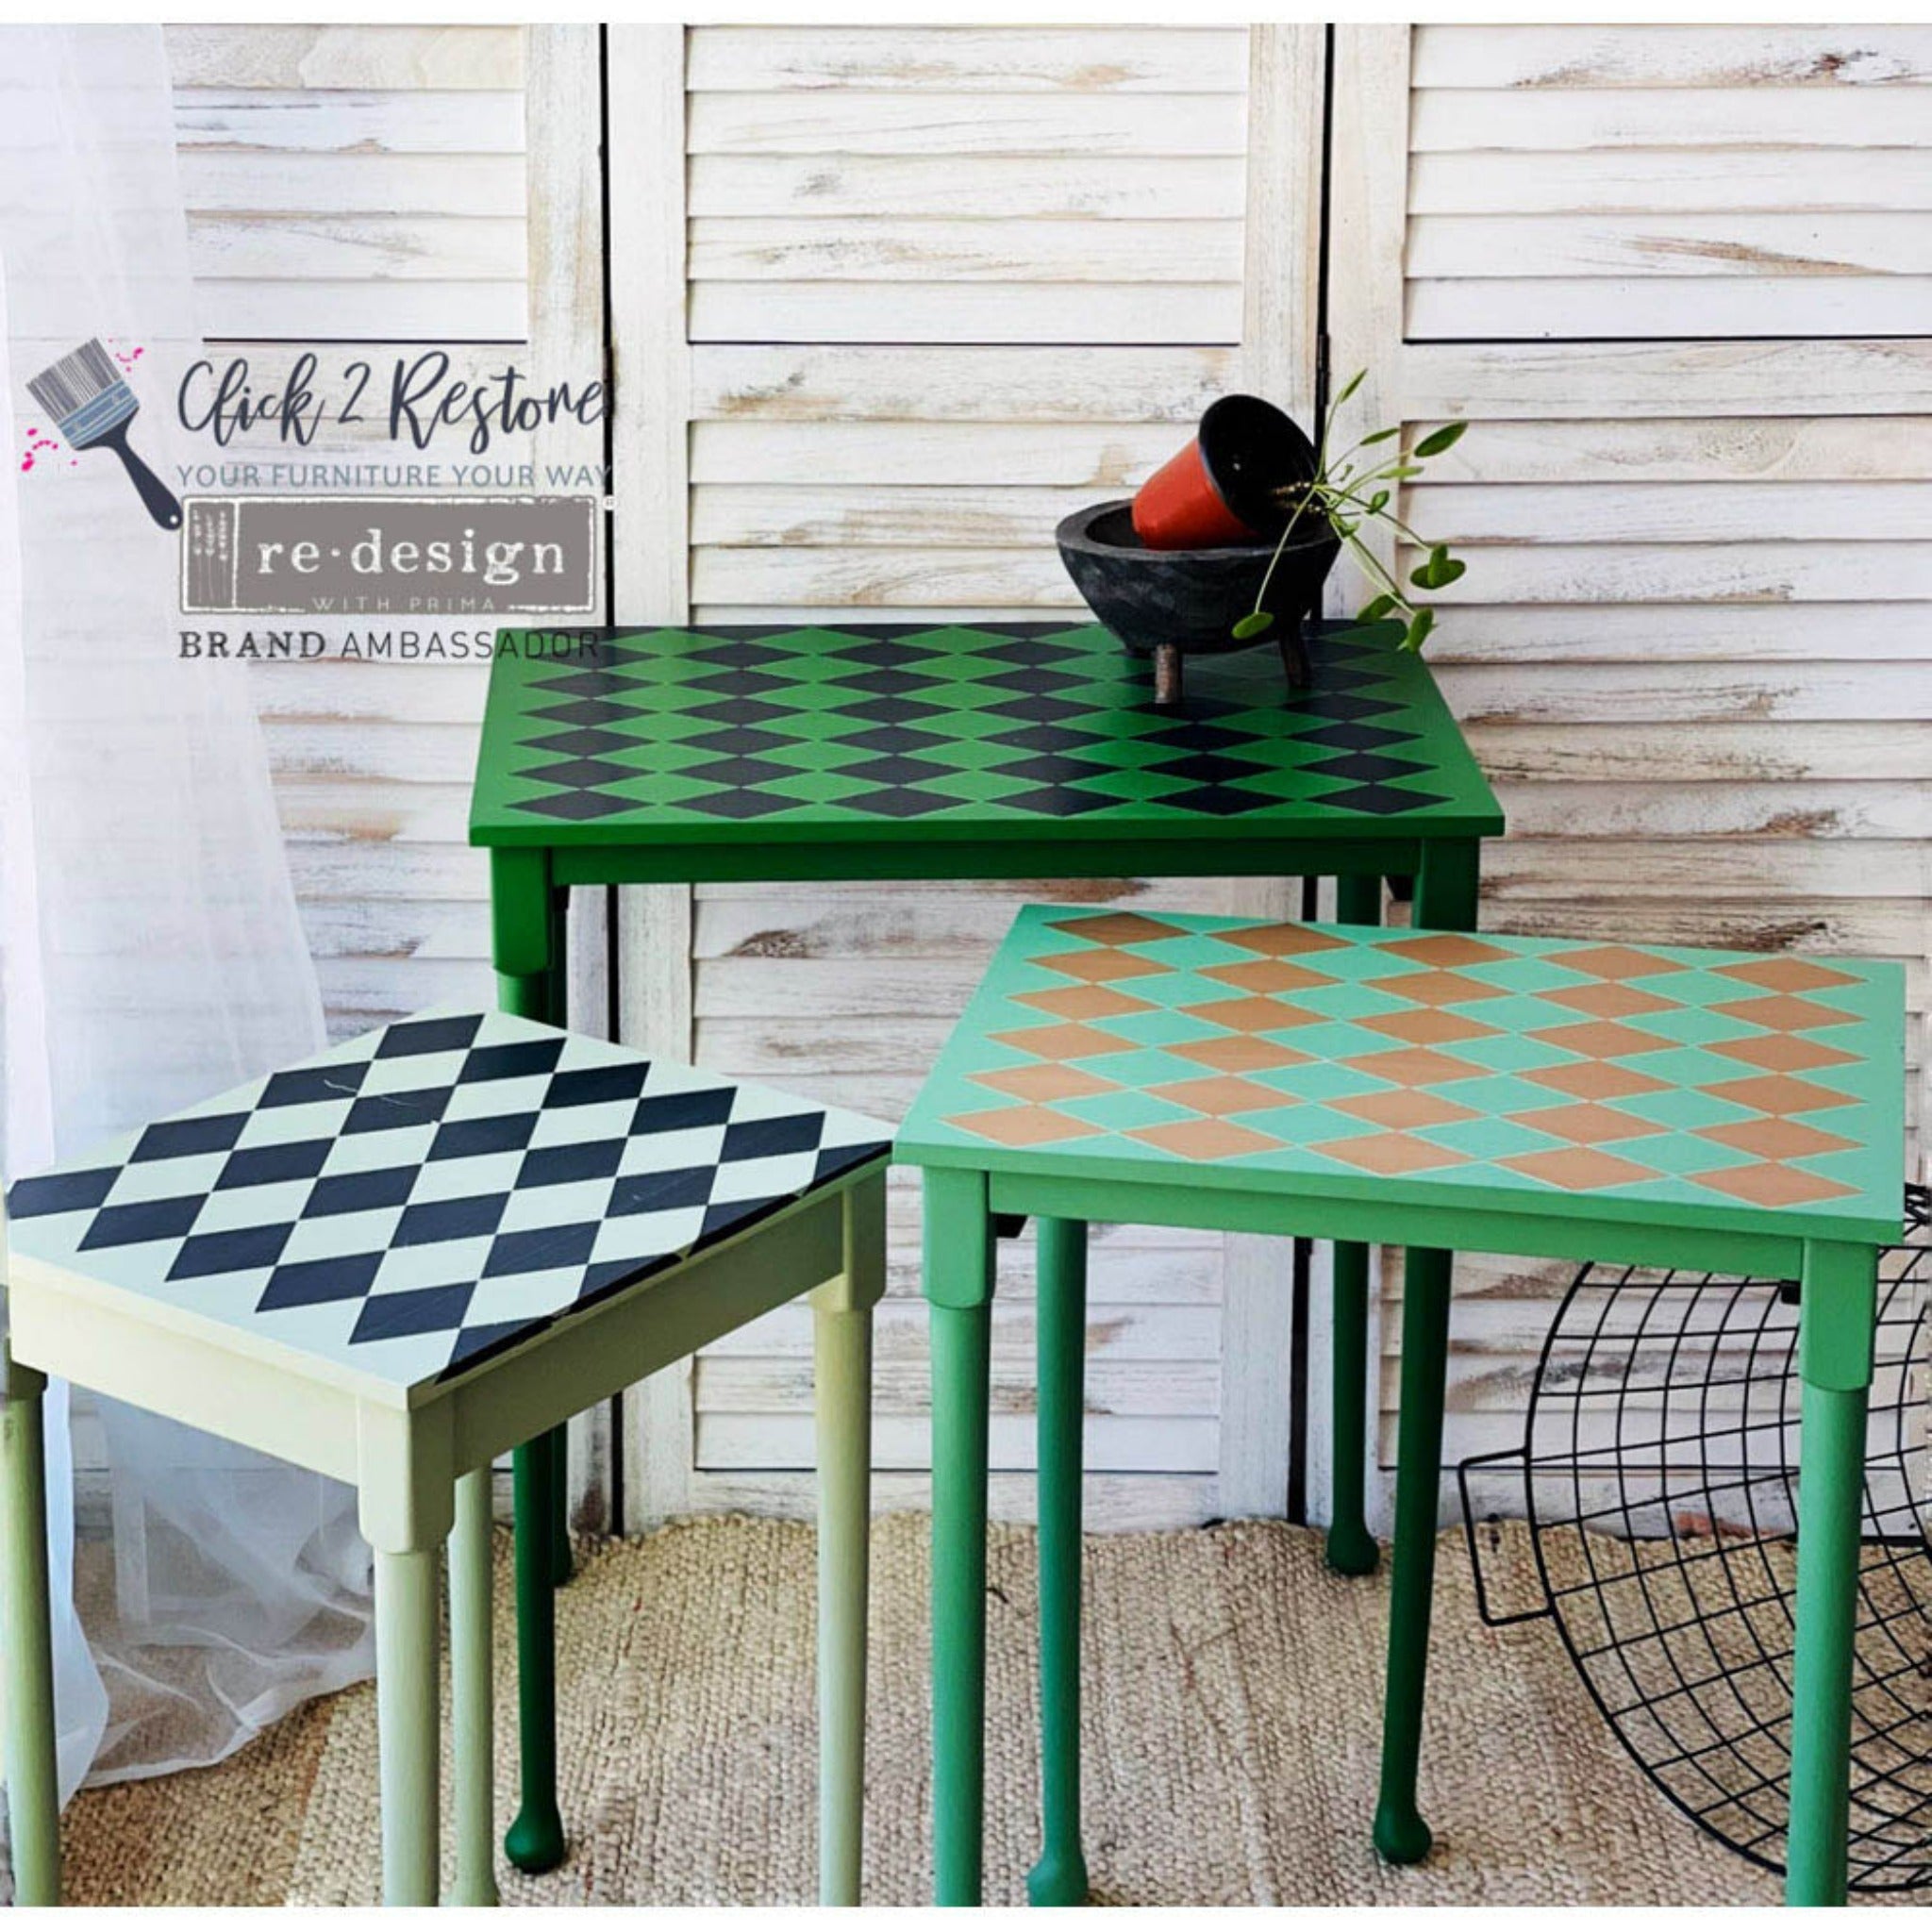 Three nesting side tables refurbished by Click 2 Restore are painted different shades of green and 2 feature the Harlequin transfer on them.